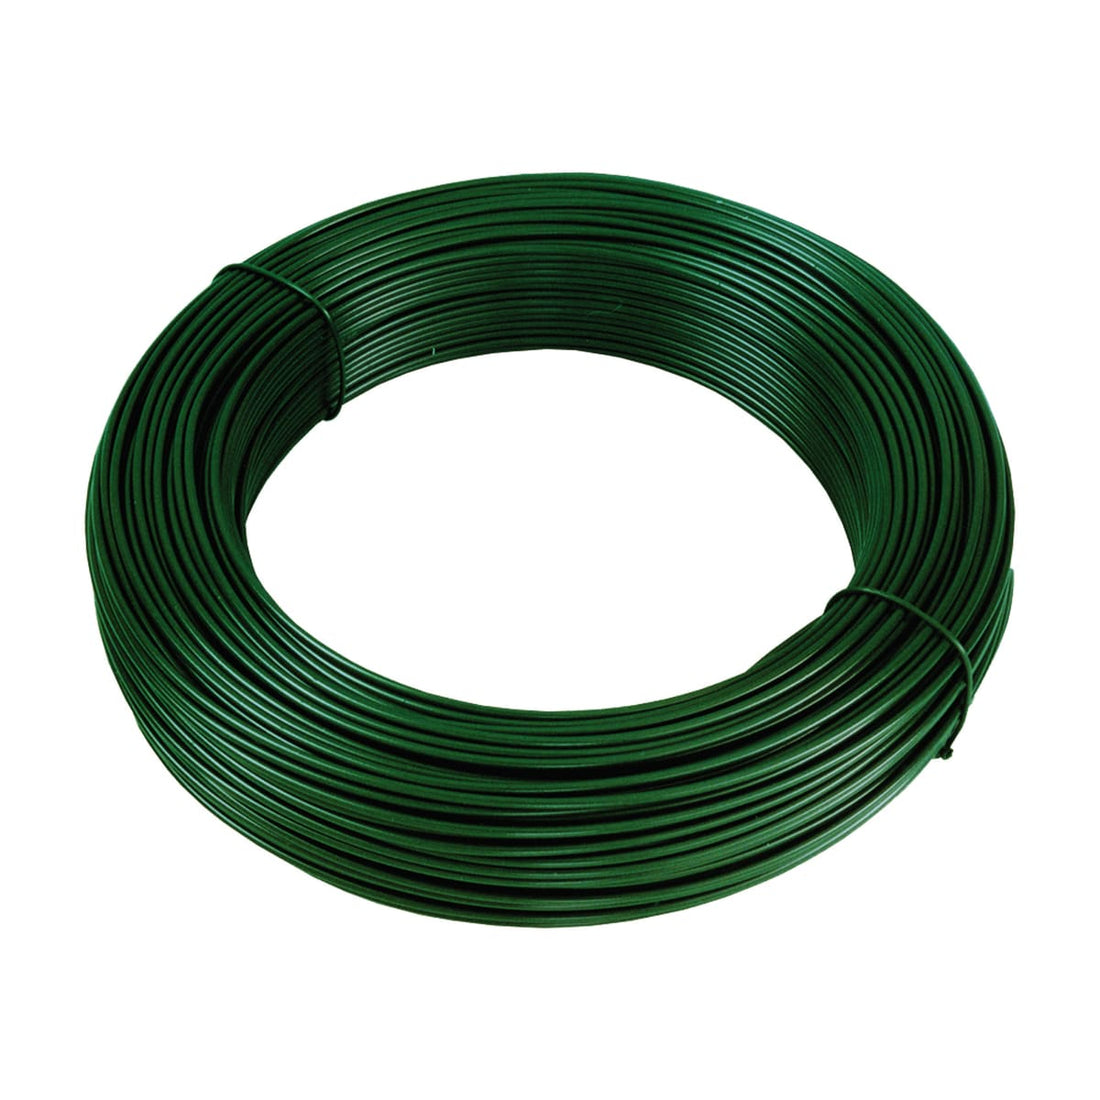 PLASTIC-COATED METAL WIRE SP. 3,1 MM 100 M GREEN